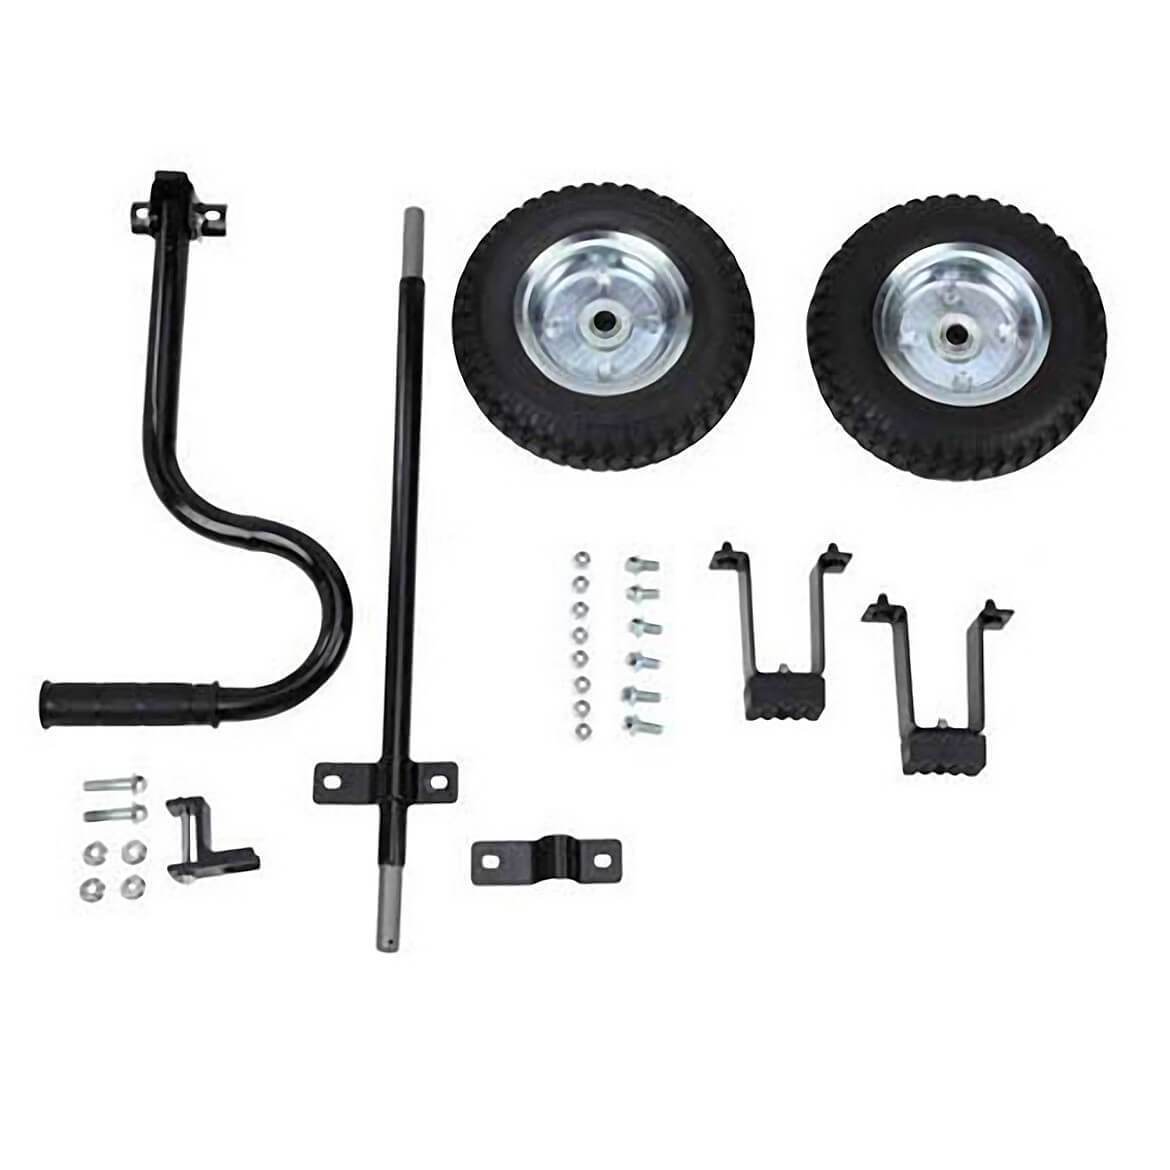 Wheel Kit For DS4000S and XP4000S Generators